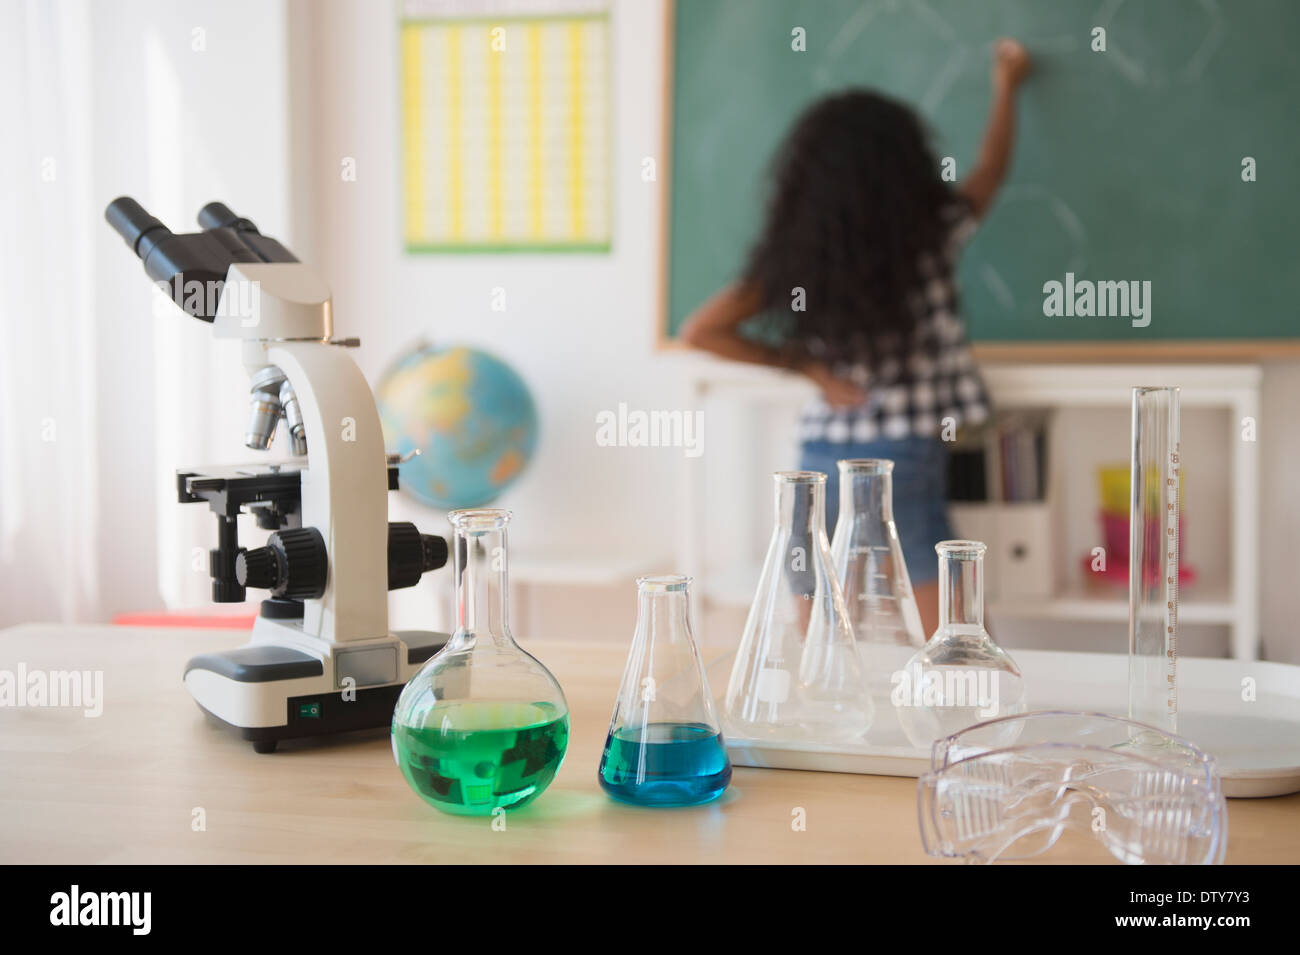 Mixed race student writing on chalkboard in classroom Stock Photo